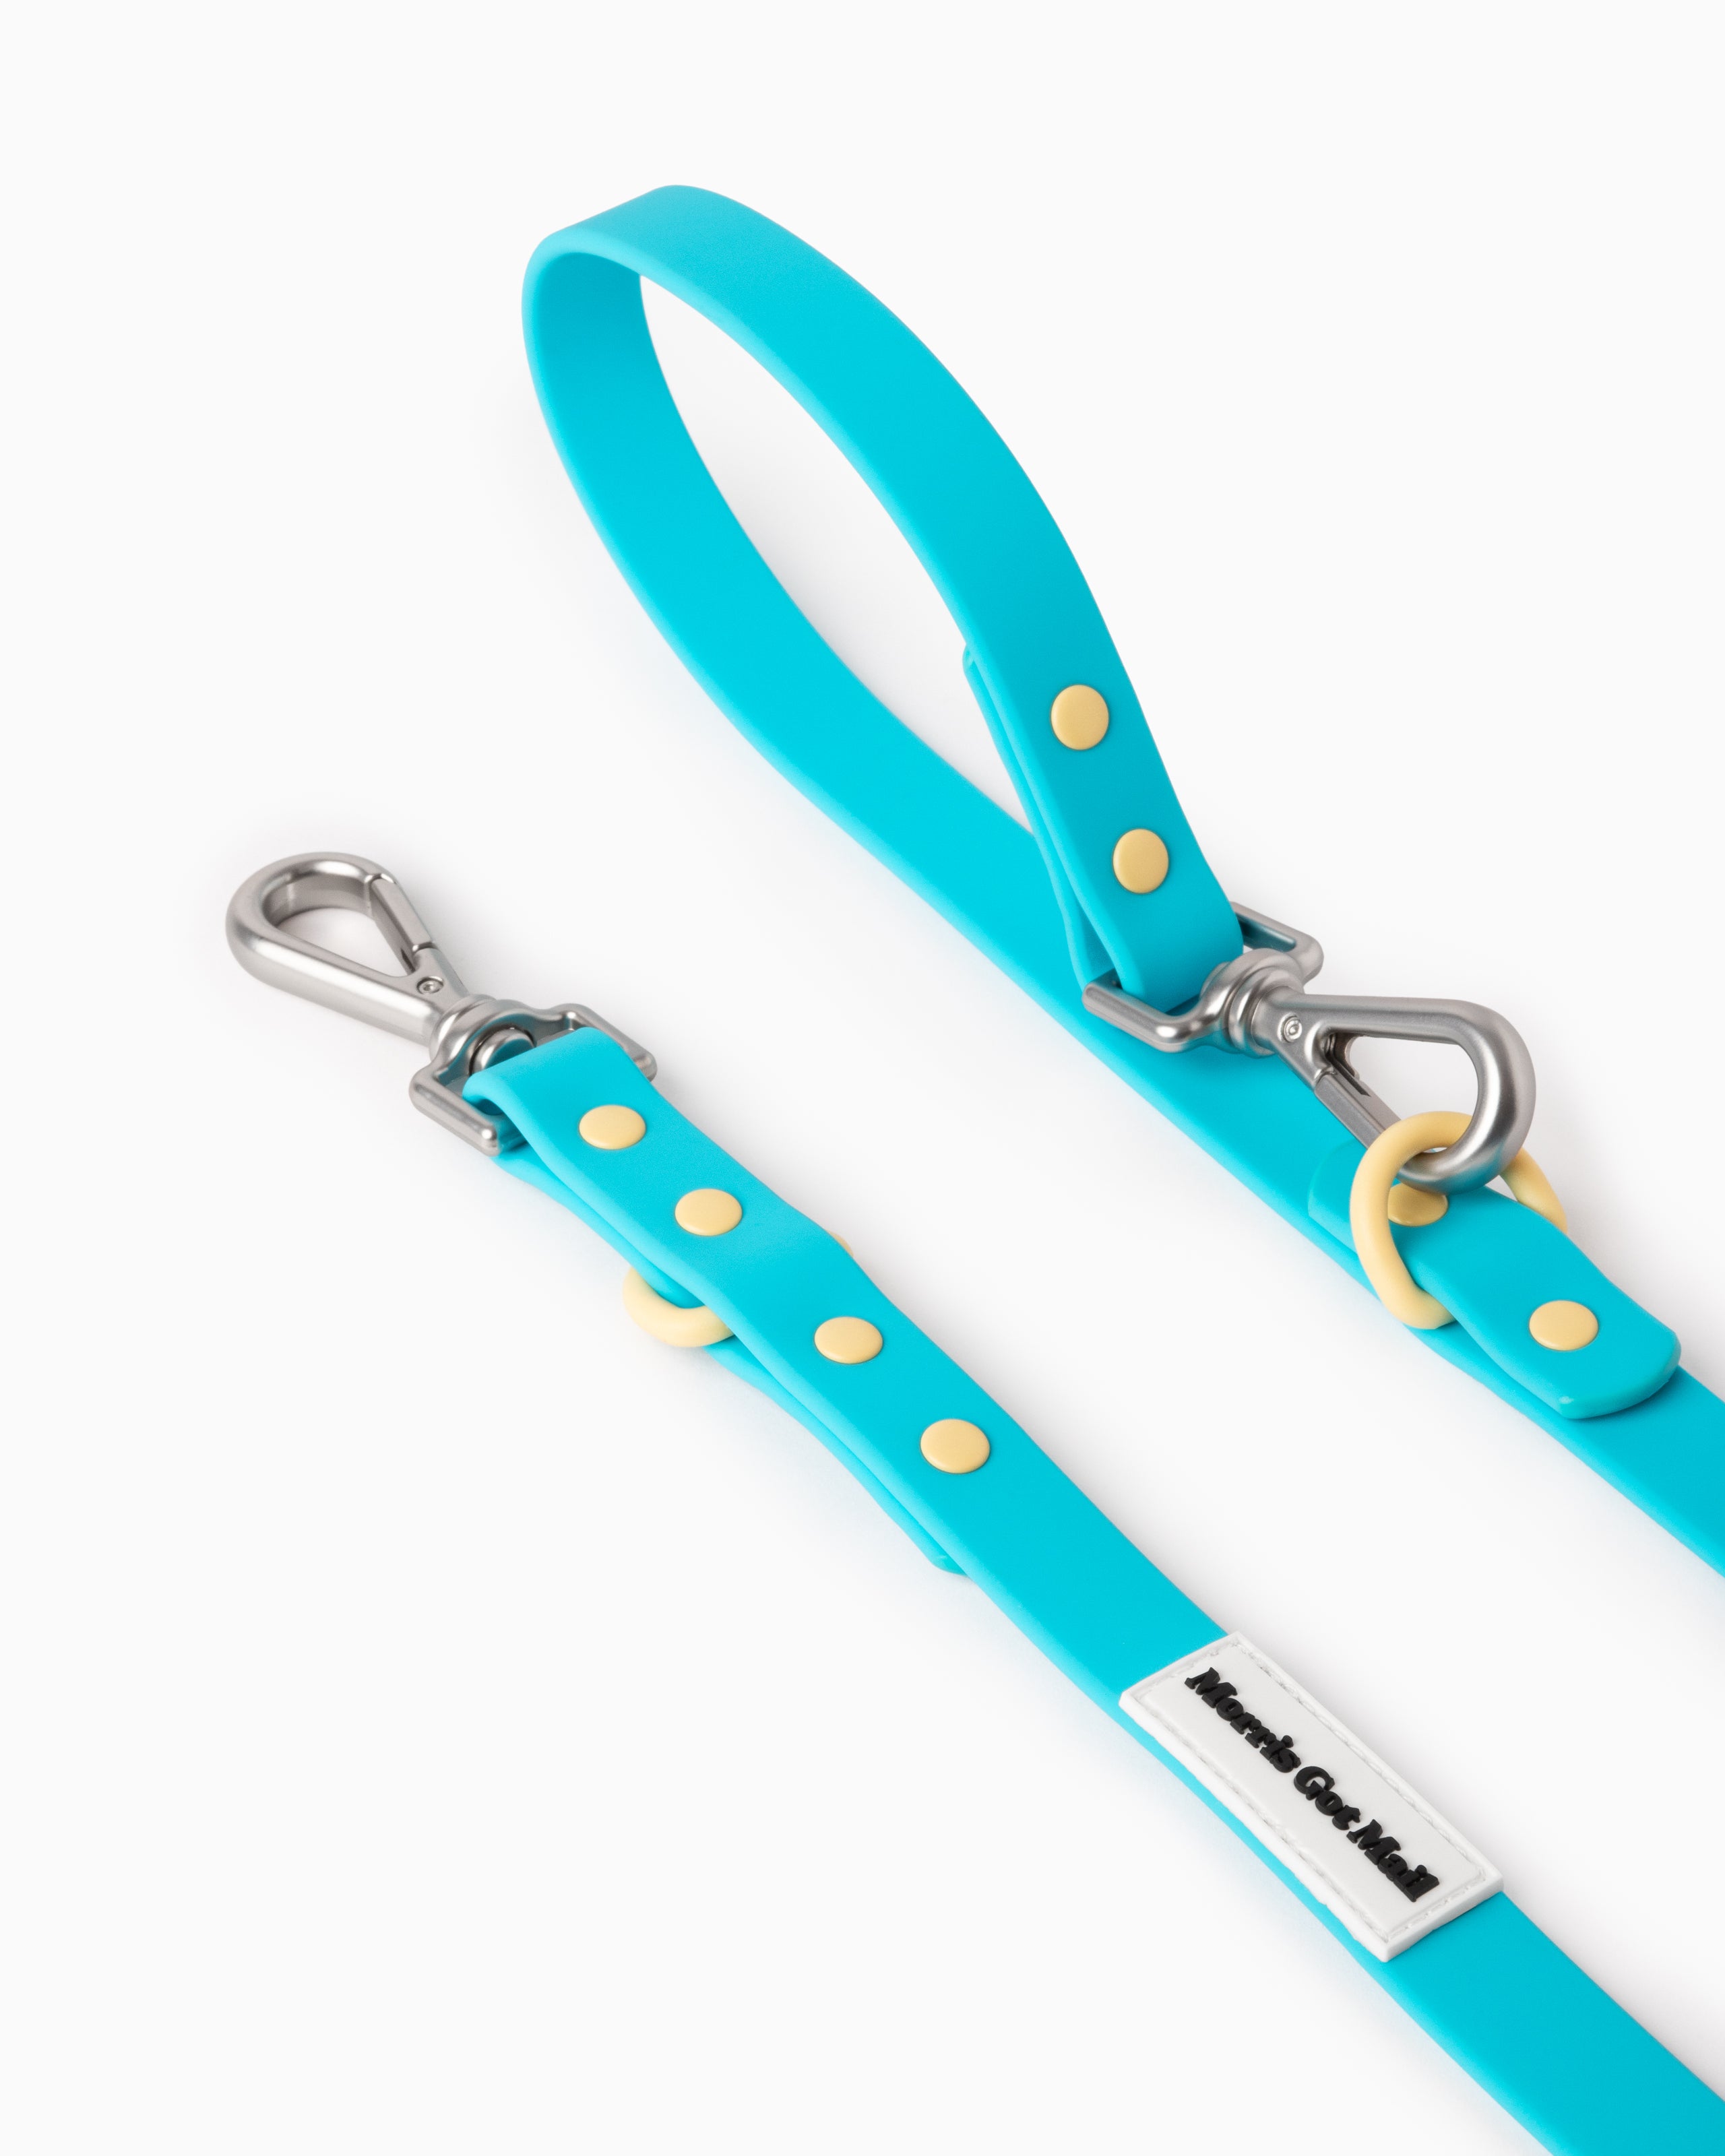 Cyan blue waterproof & odor resistant dog leash with a two tone colorblock design, two length options, a handle, carbon coated steel hardware, & zinc alloy attachment hooks.